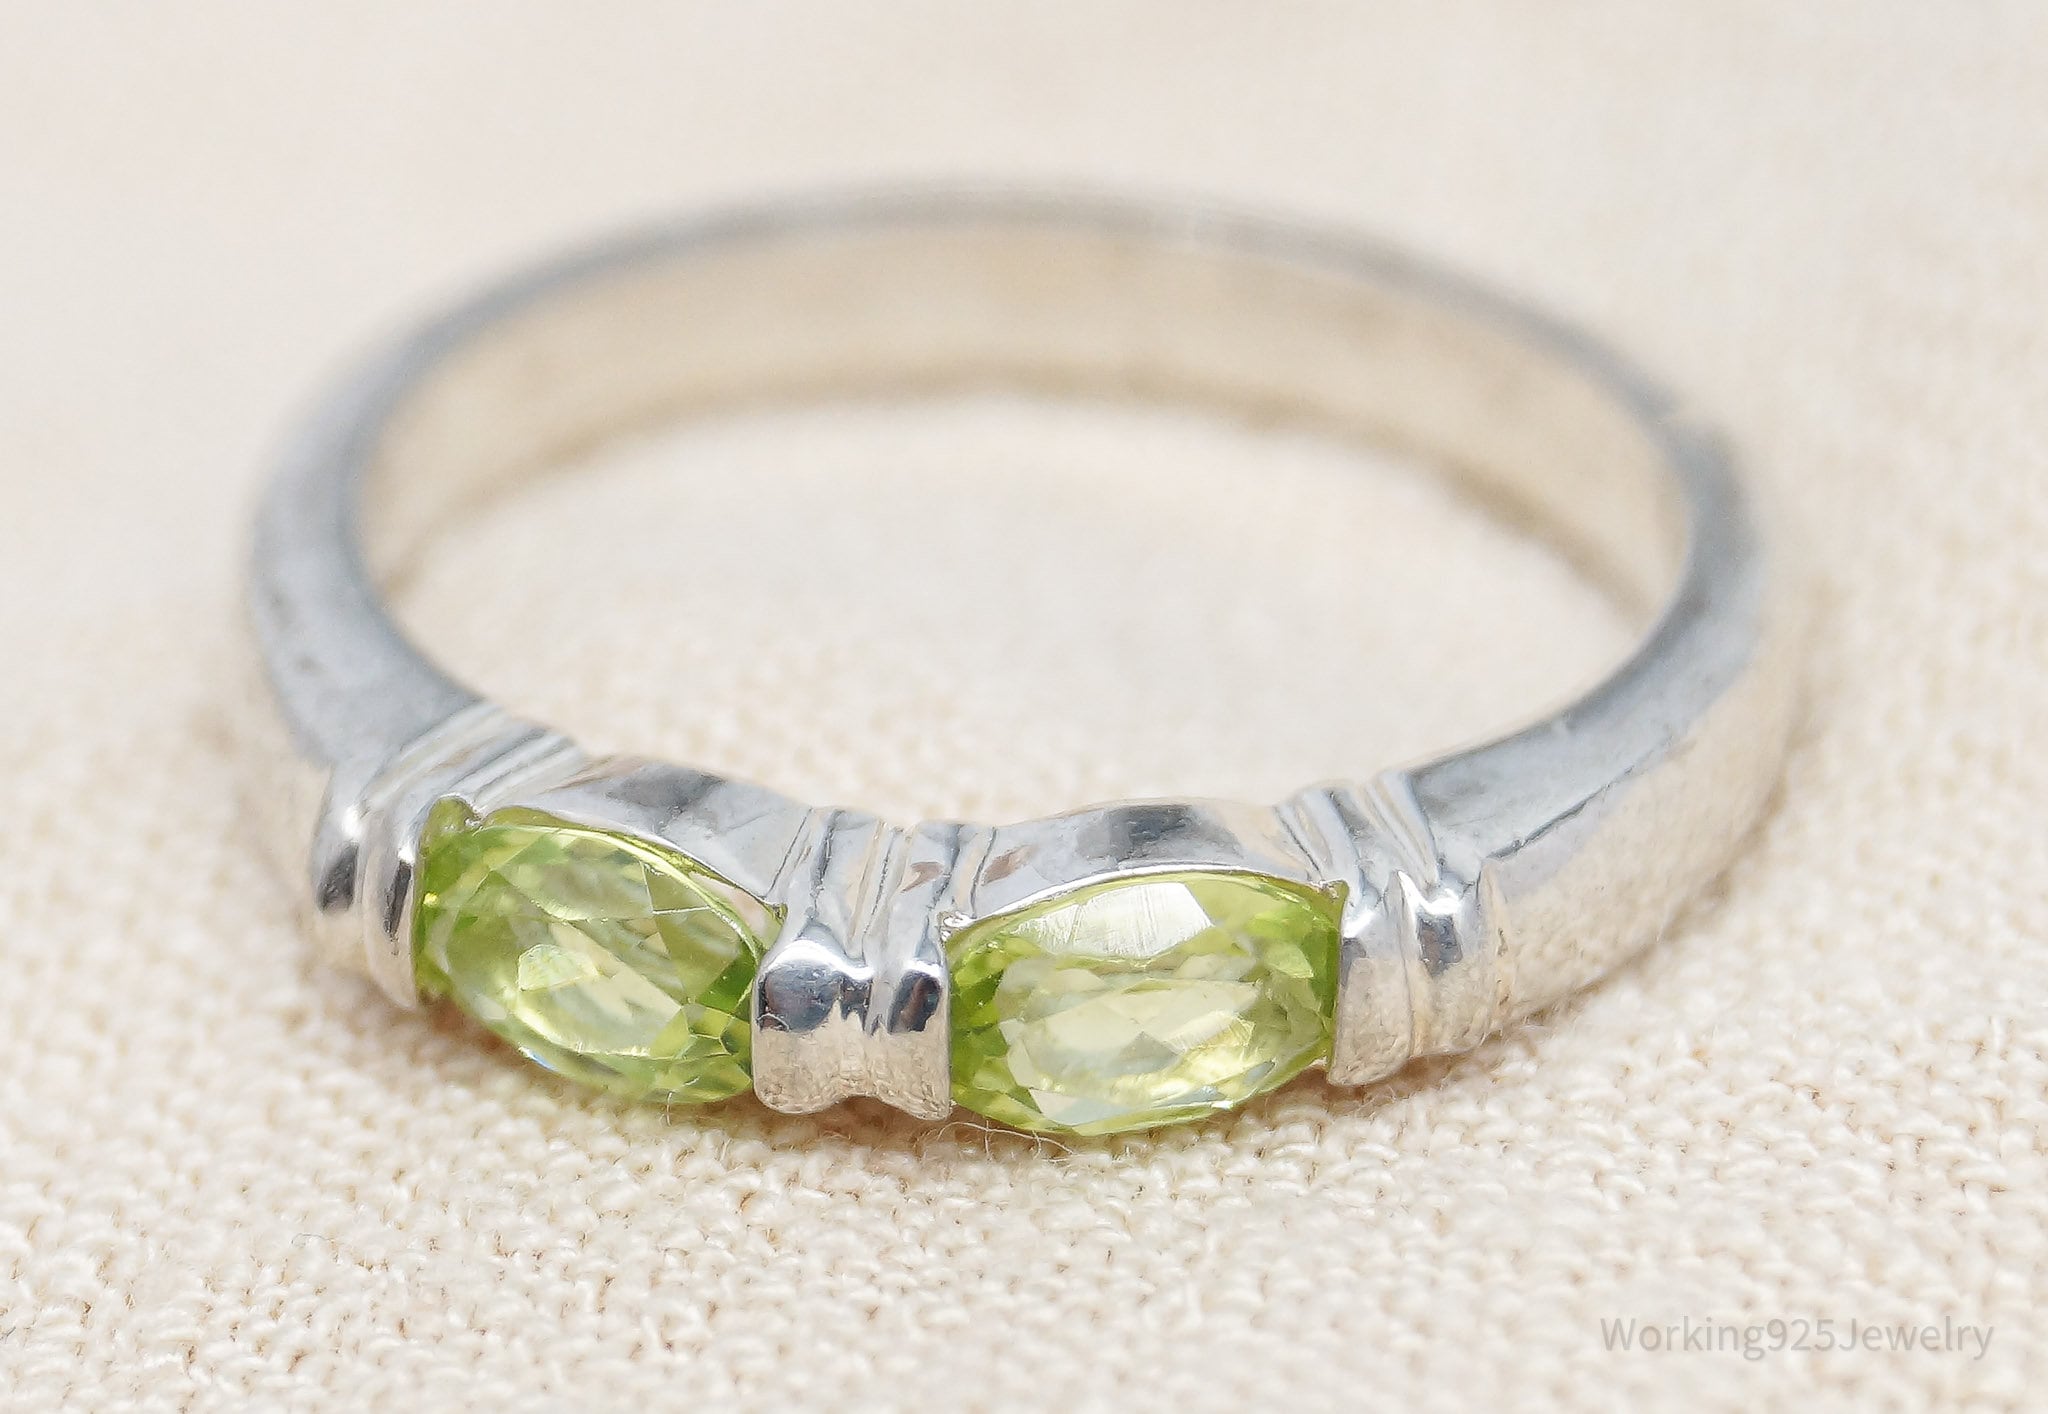 Vintage Peridot Sterling Silver Ring - Size 9